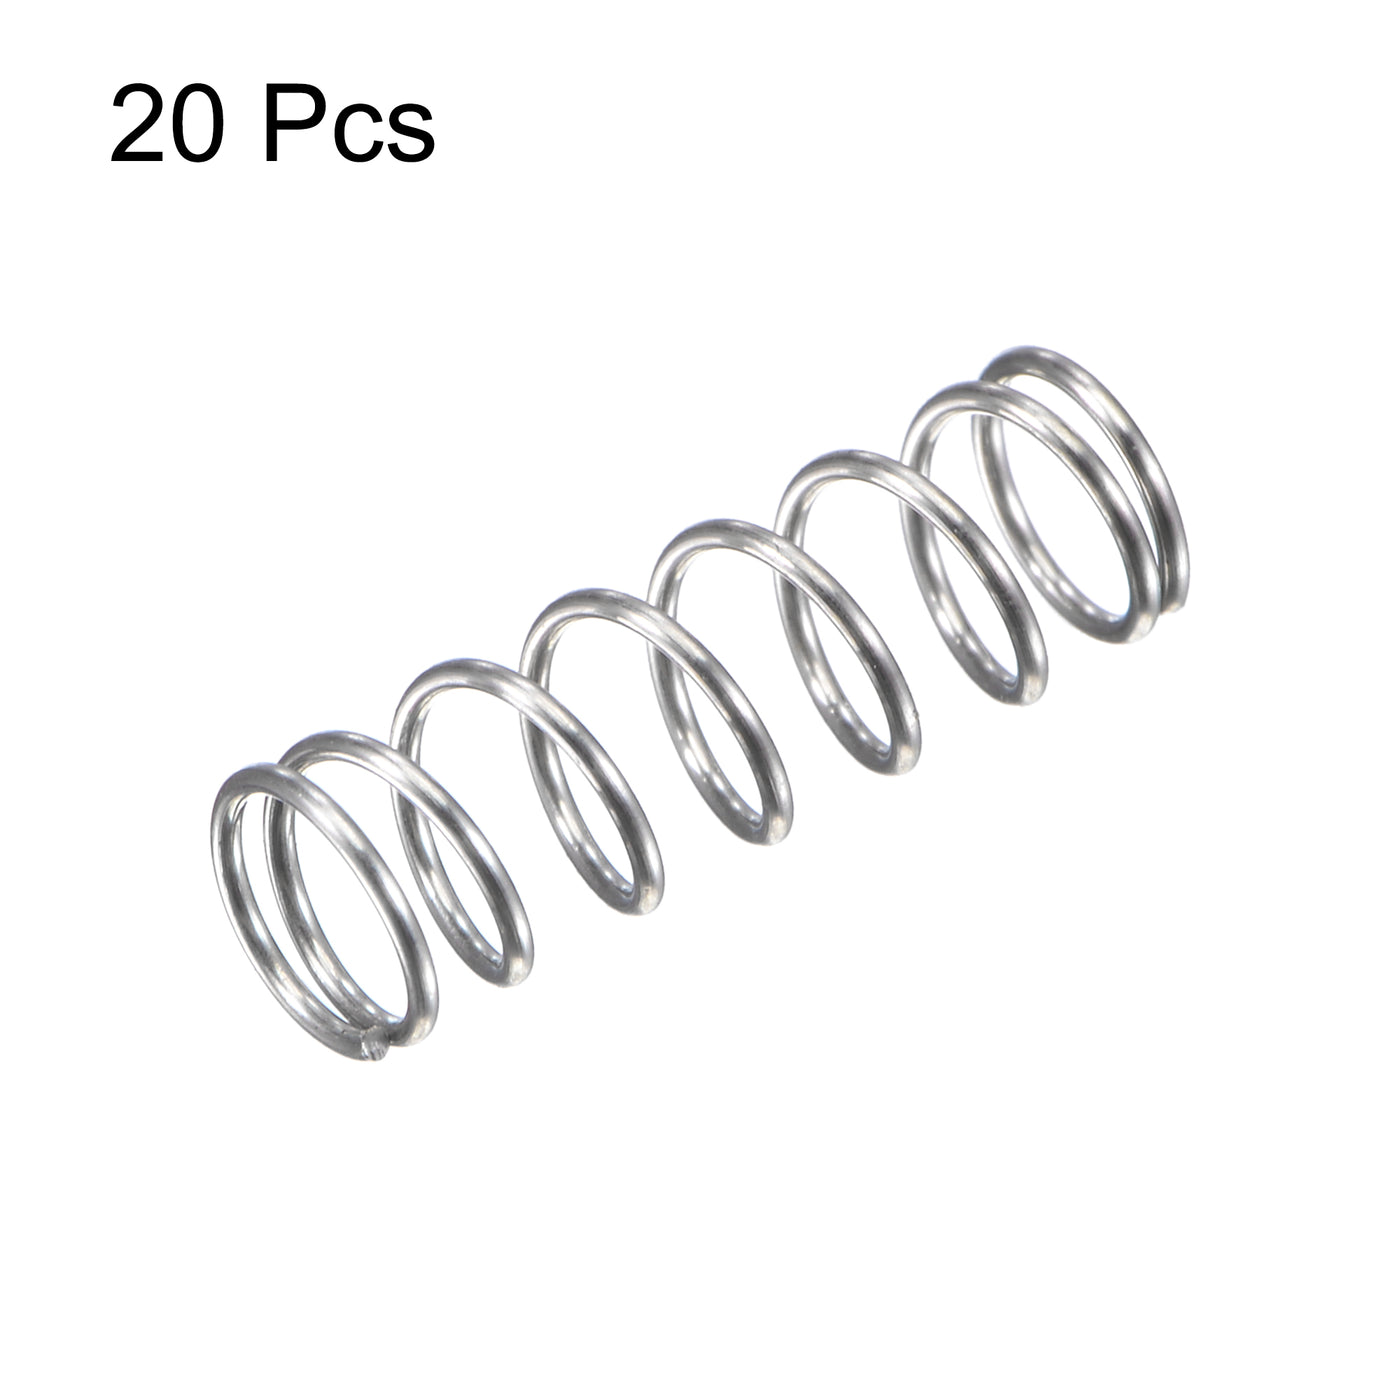 uxcell Uxcell 5mmx0.5mmx15mm 304 Stainless Steel Compression Spring 5.9N Load Capacity 20pcs